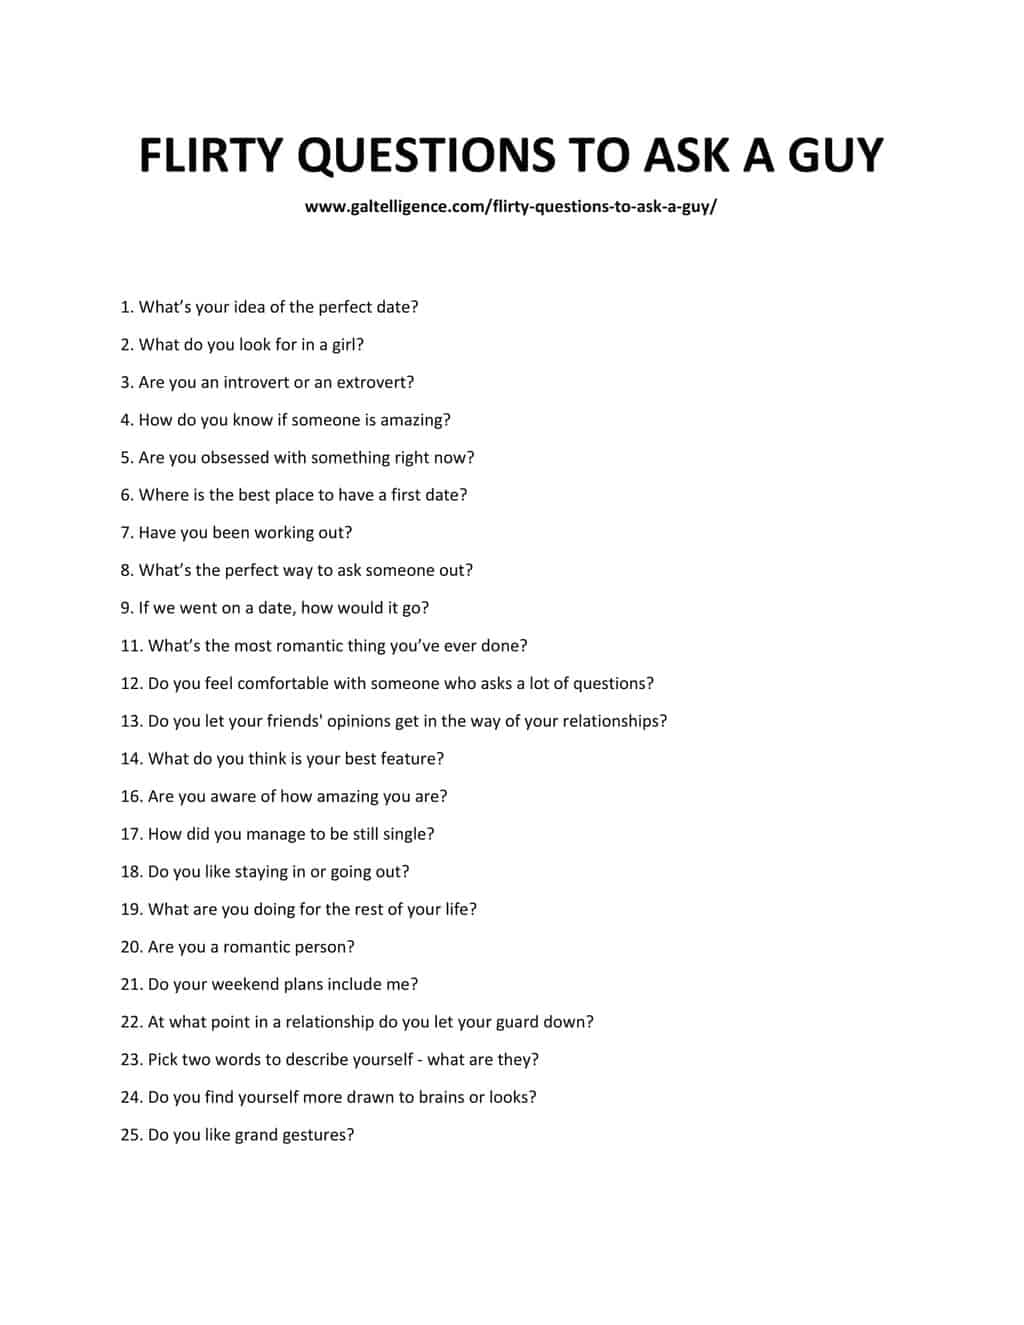 FLIRTY_QUESTIONS_TO_ASK_A_GUY-1[1]